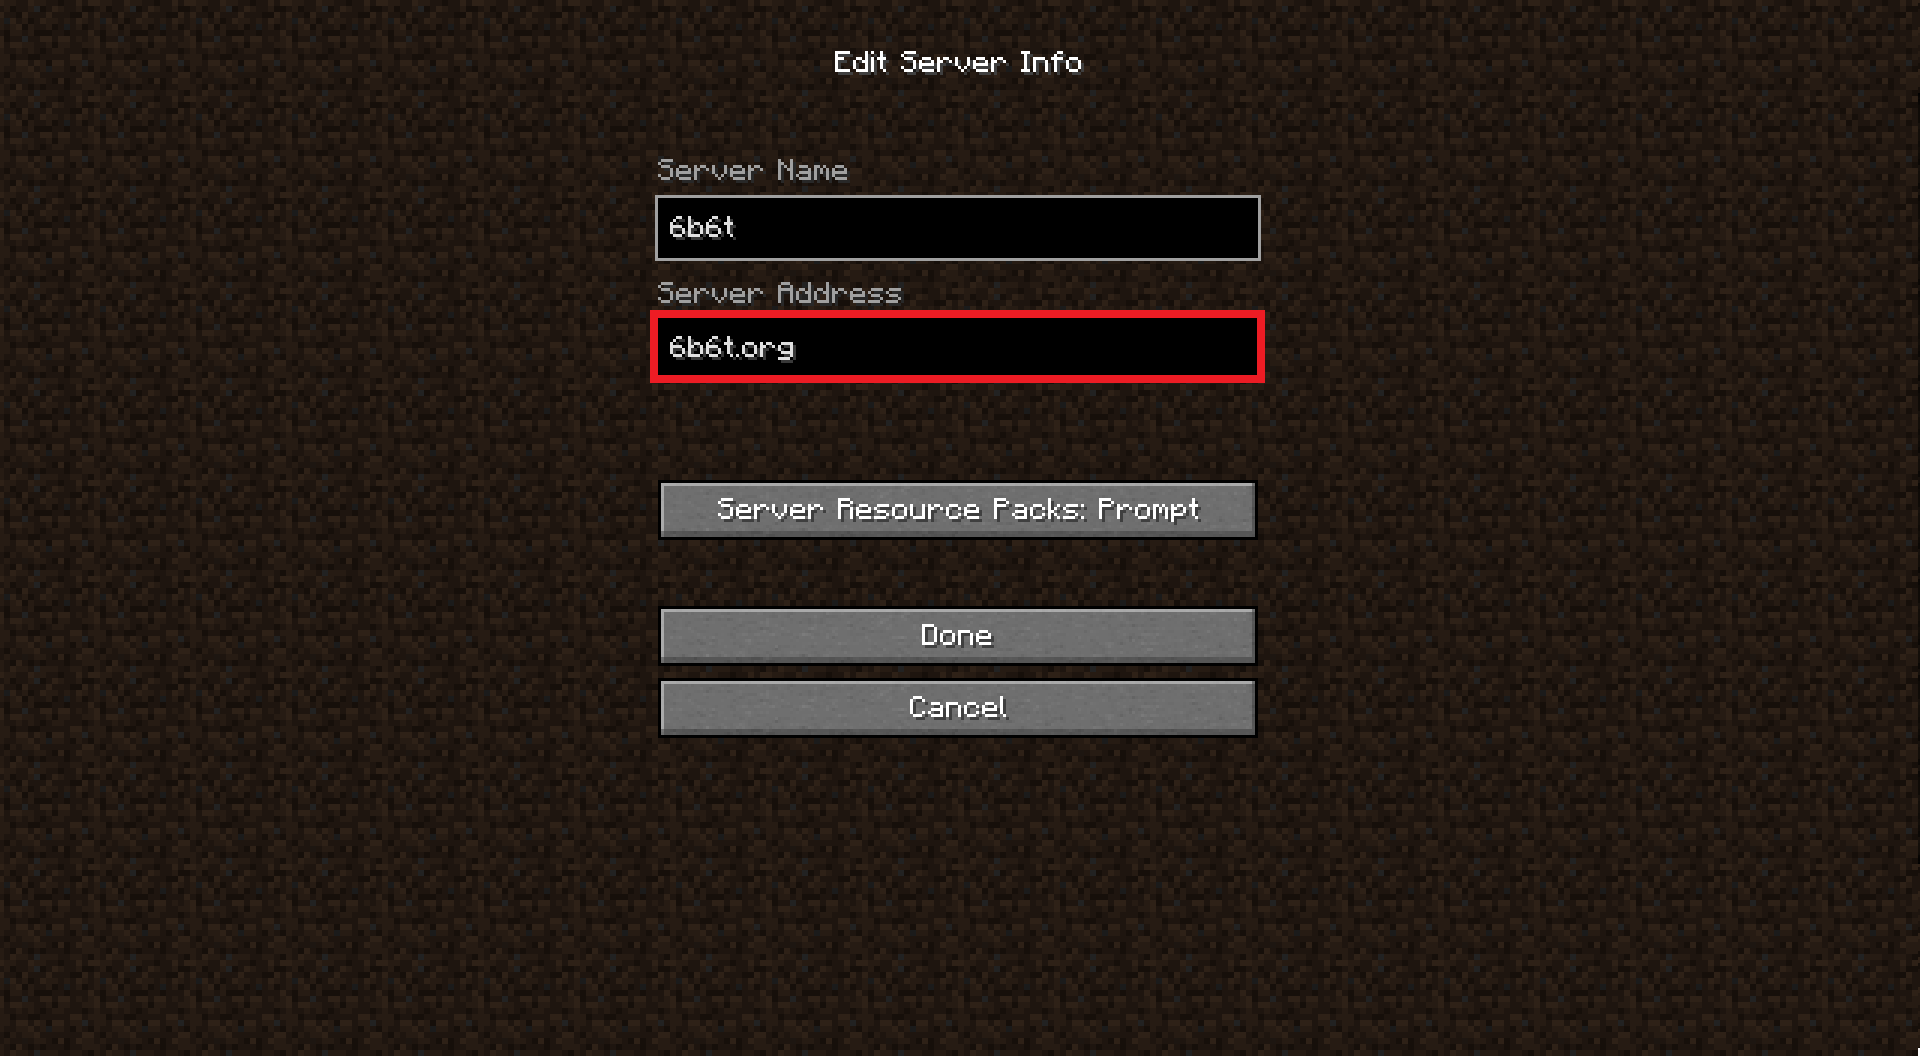 Server information of add server screen filled out